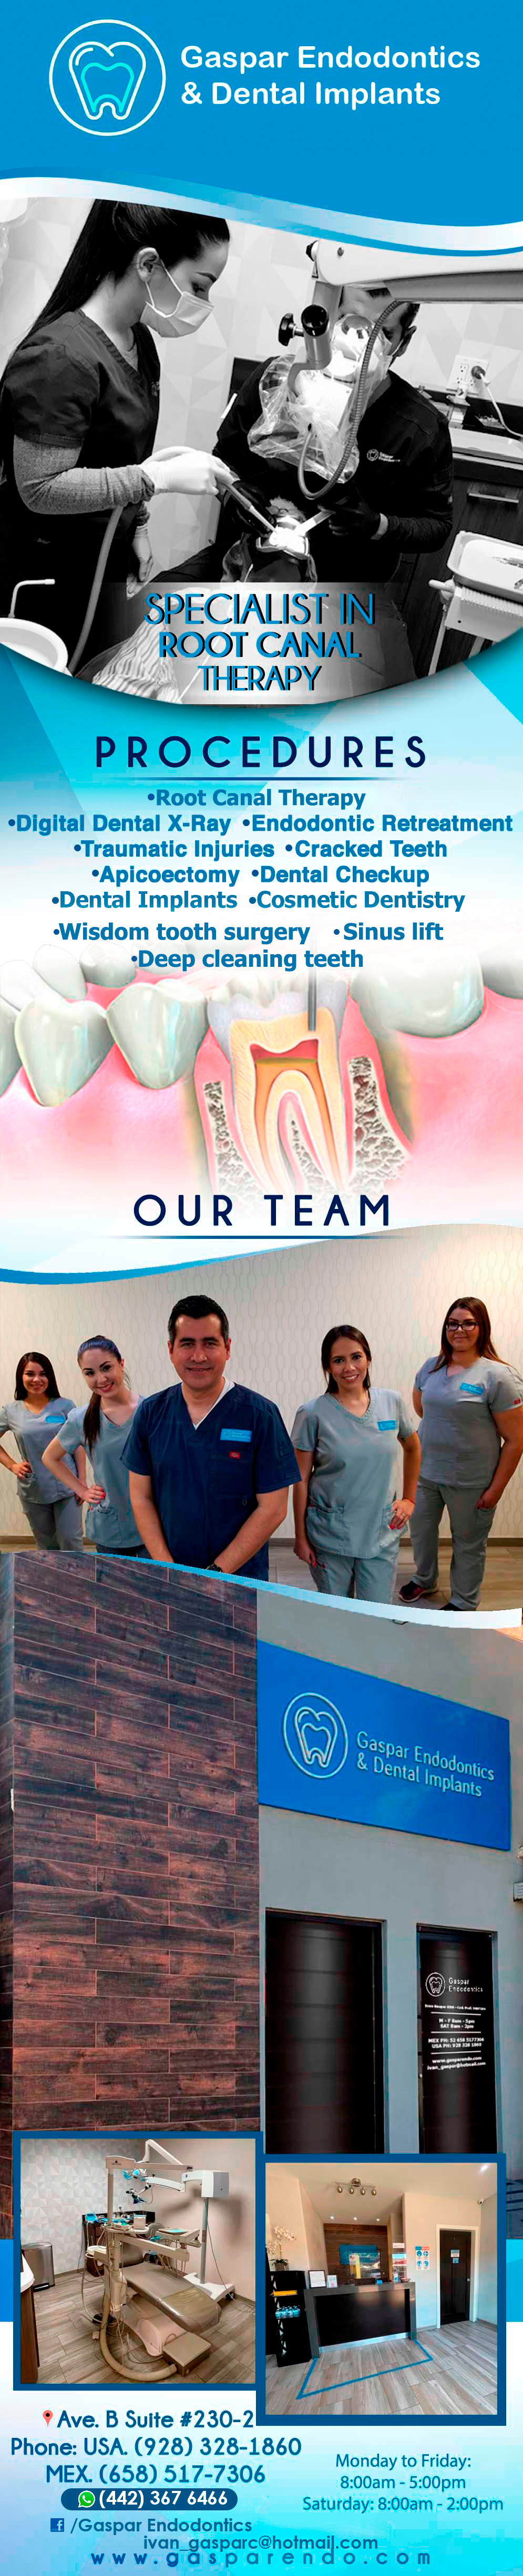 GASPAR ENDODONTICS Ivan Gaspar DDS-Dr. Gaspar received his dental degree from University of Baja California School of Dentistry in 1999. He and went on to complete his postgraduate work in endodontics at same University in 2001.Dr. Gaspar Has been in full-time practice as an endodontist since 2001. He currently maintains a full-time clinical practice, Gaspar Endodontics in Los Algodones, limited to endodontics.  Member Mexican Dental Association.    